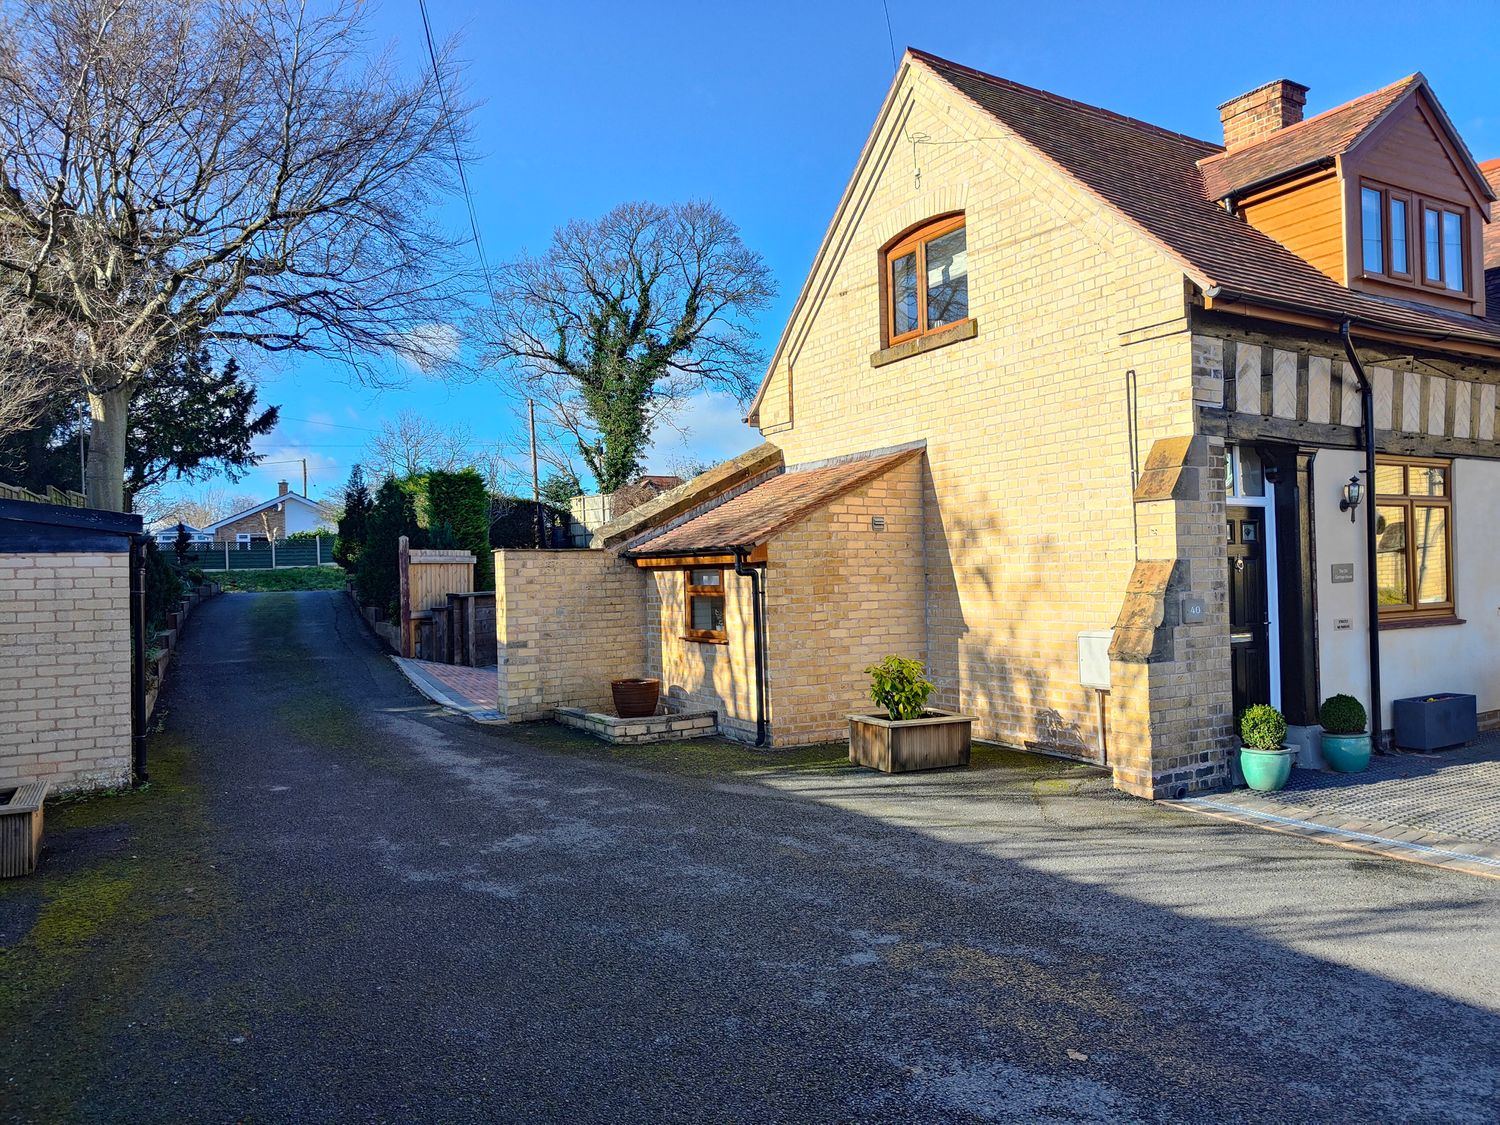 The Old Carriage House - Cotswolds - 1067435 - photo 1